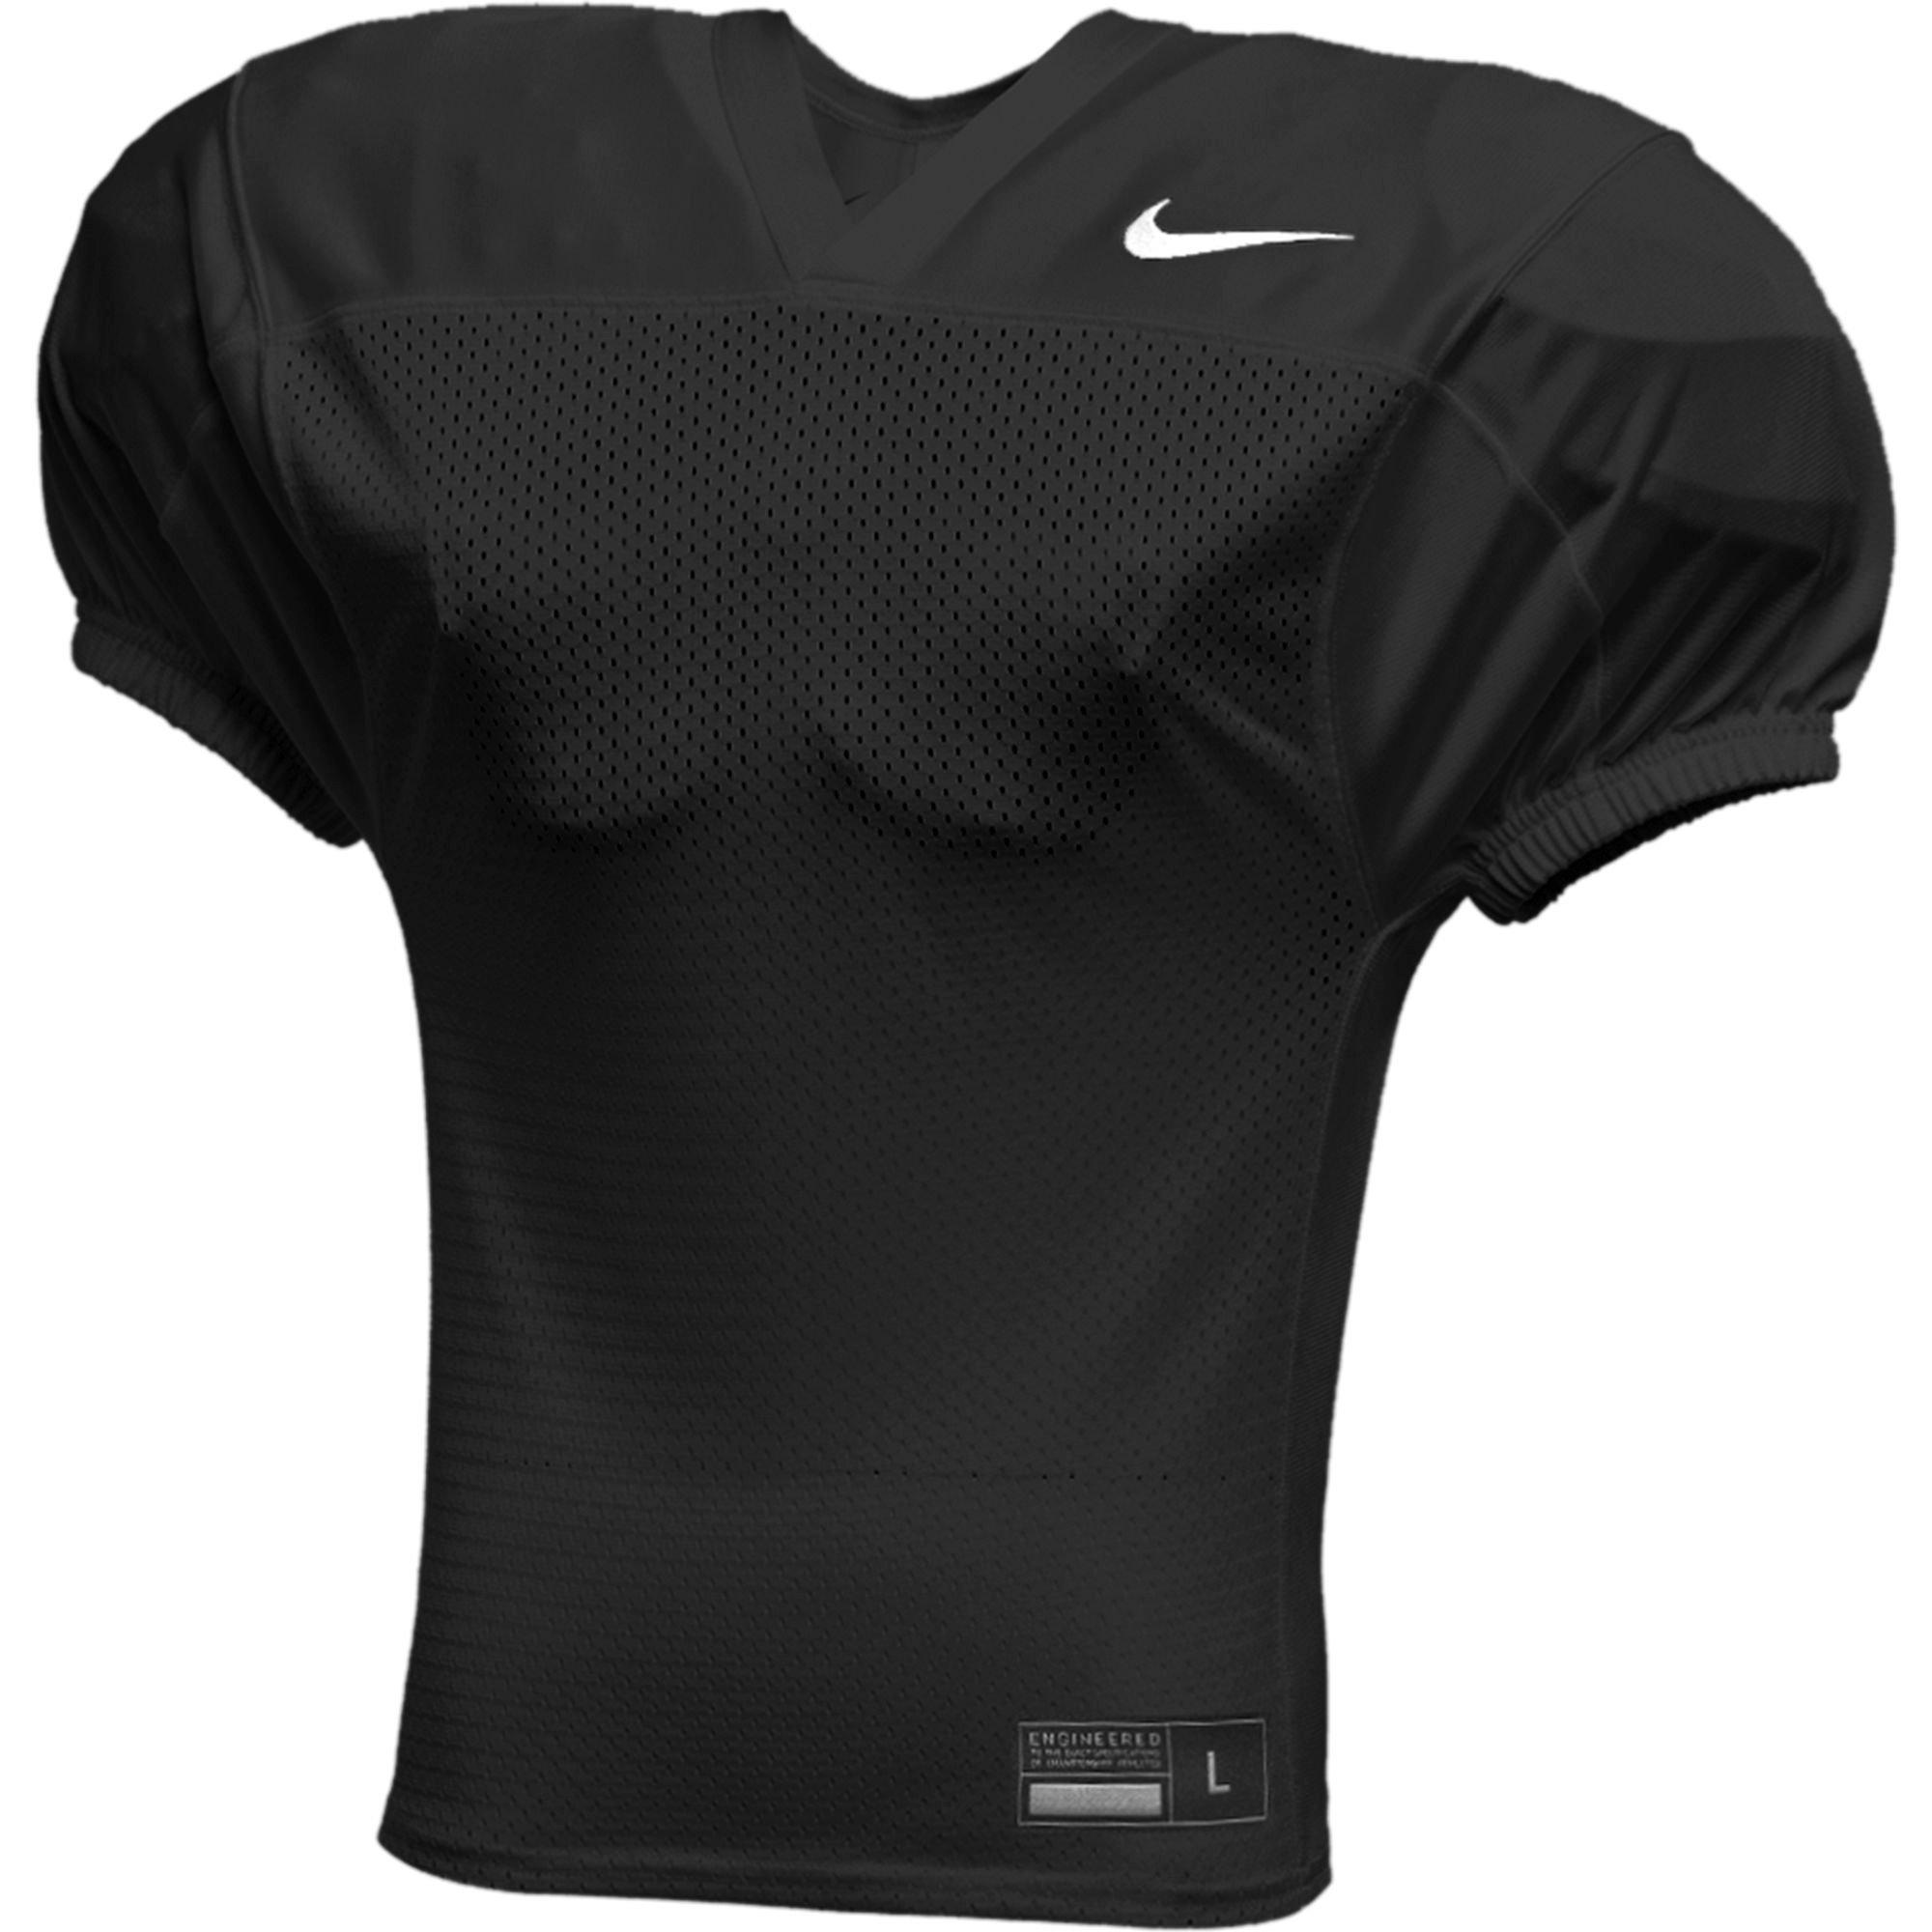 Nike Youth Recruit Practice Football Jersey, Kids, Small, Black